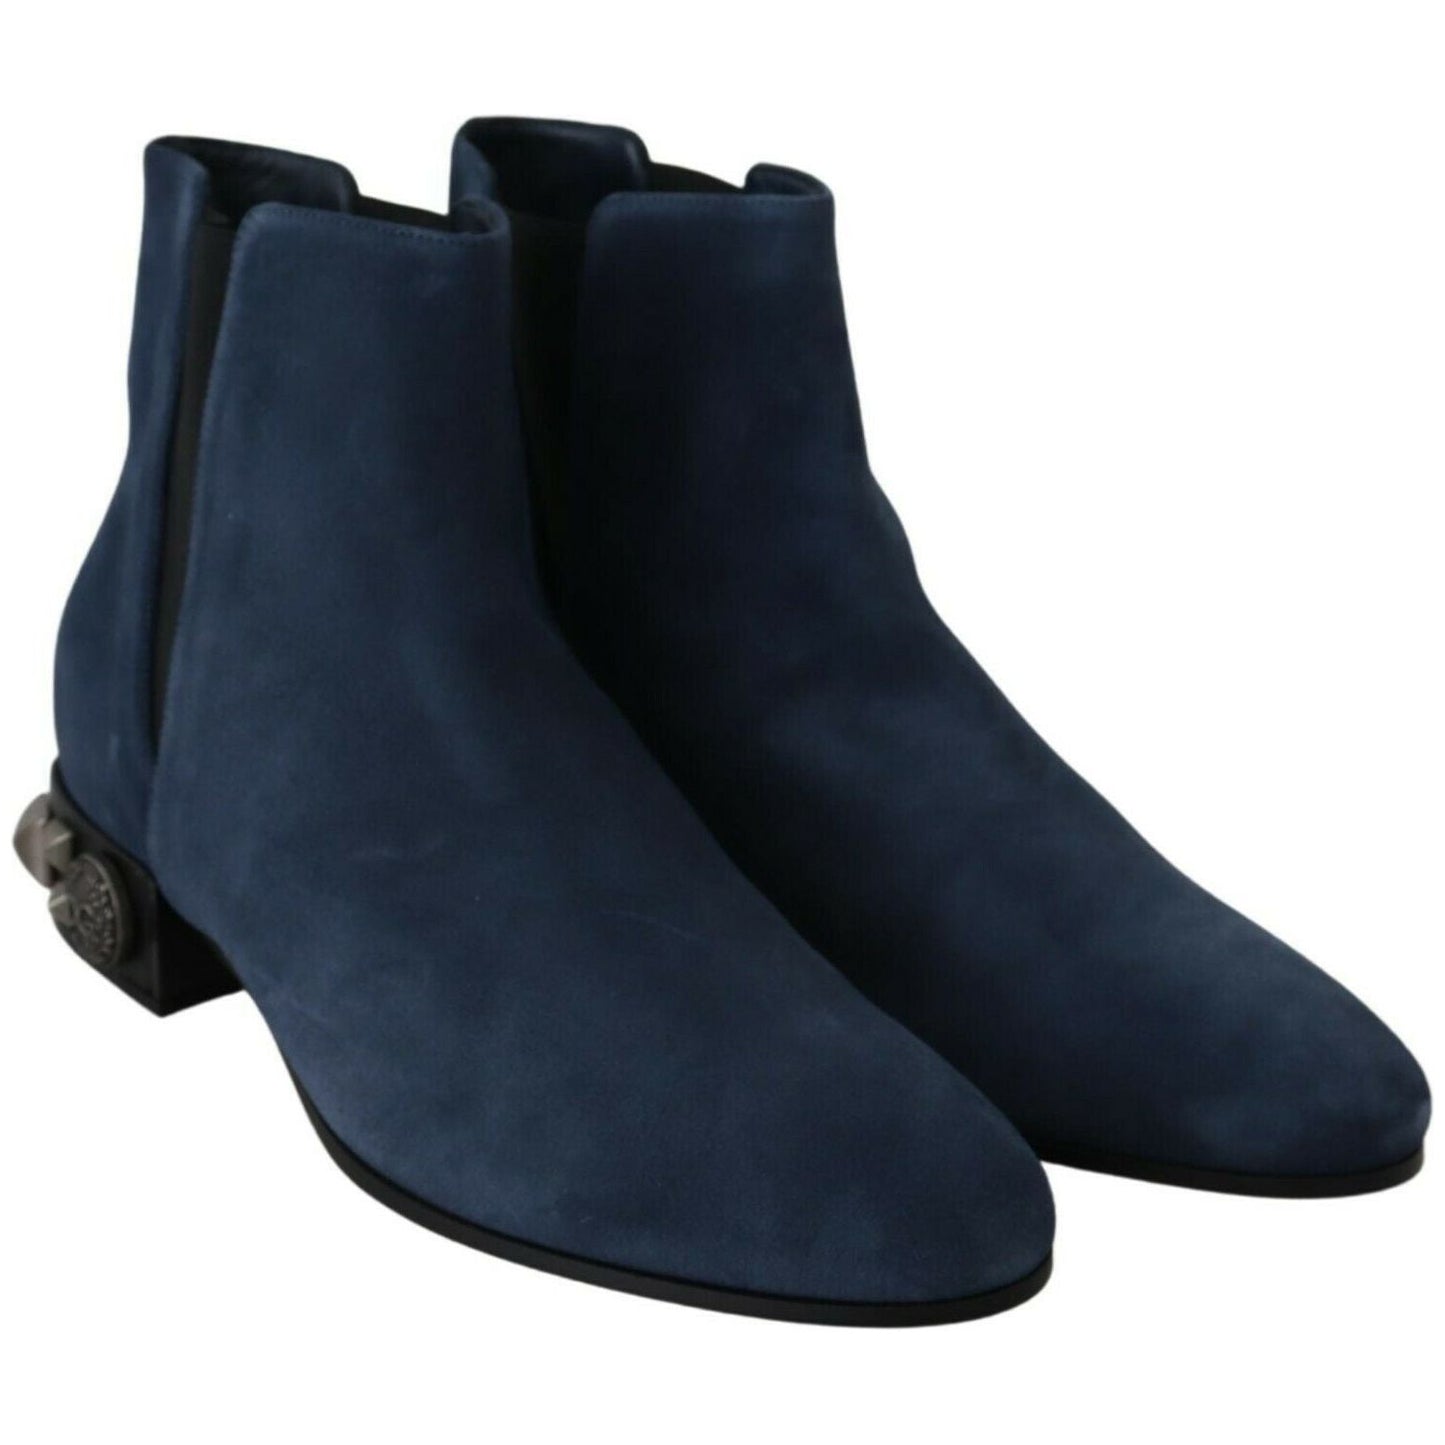 Dolce & Gabbana Chic Blue Suede Mid-Calf Boots with Stud Details WOMAN BOOTS blue-suede-embellished-studded-boots-shoes s-l1600-2022-06-30T120606.411-9fca1886-5c4.jpg